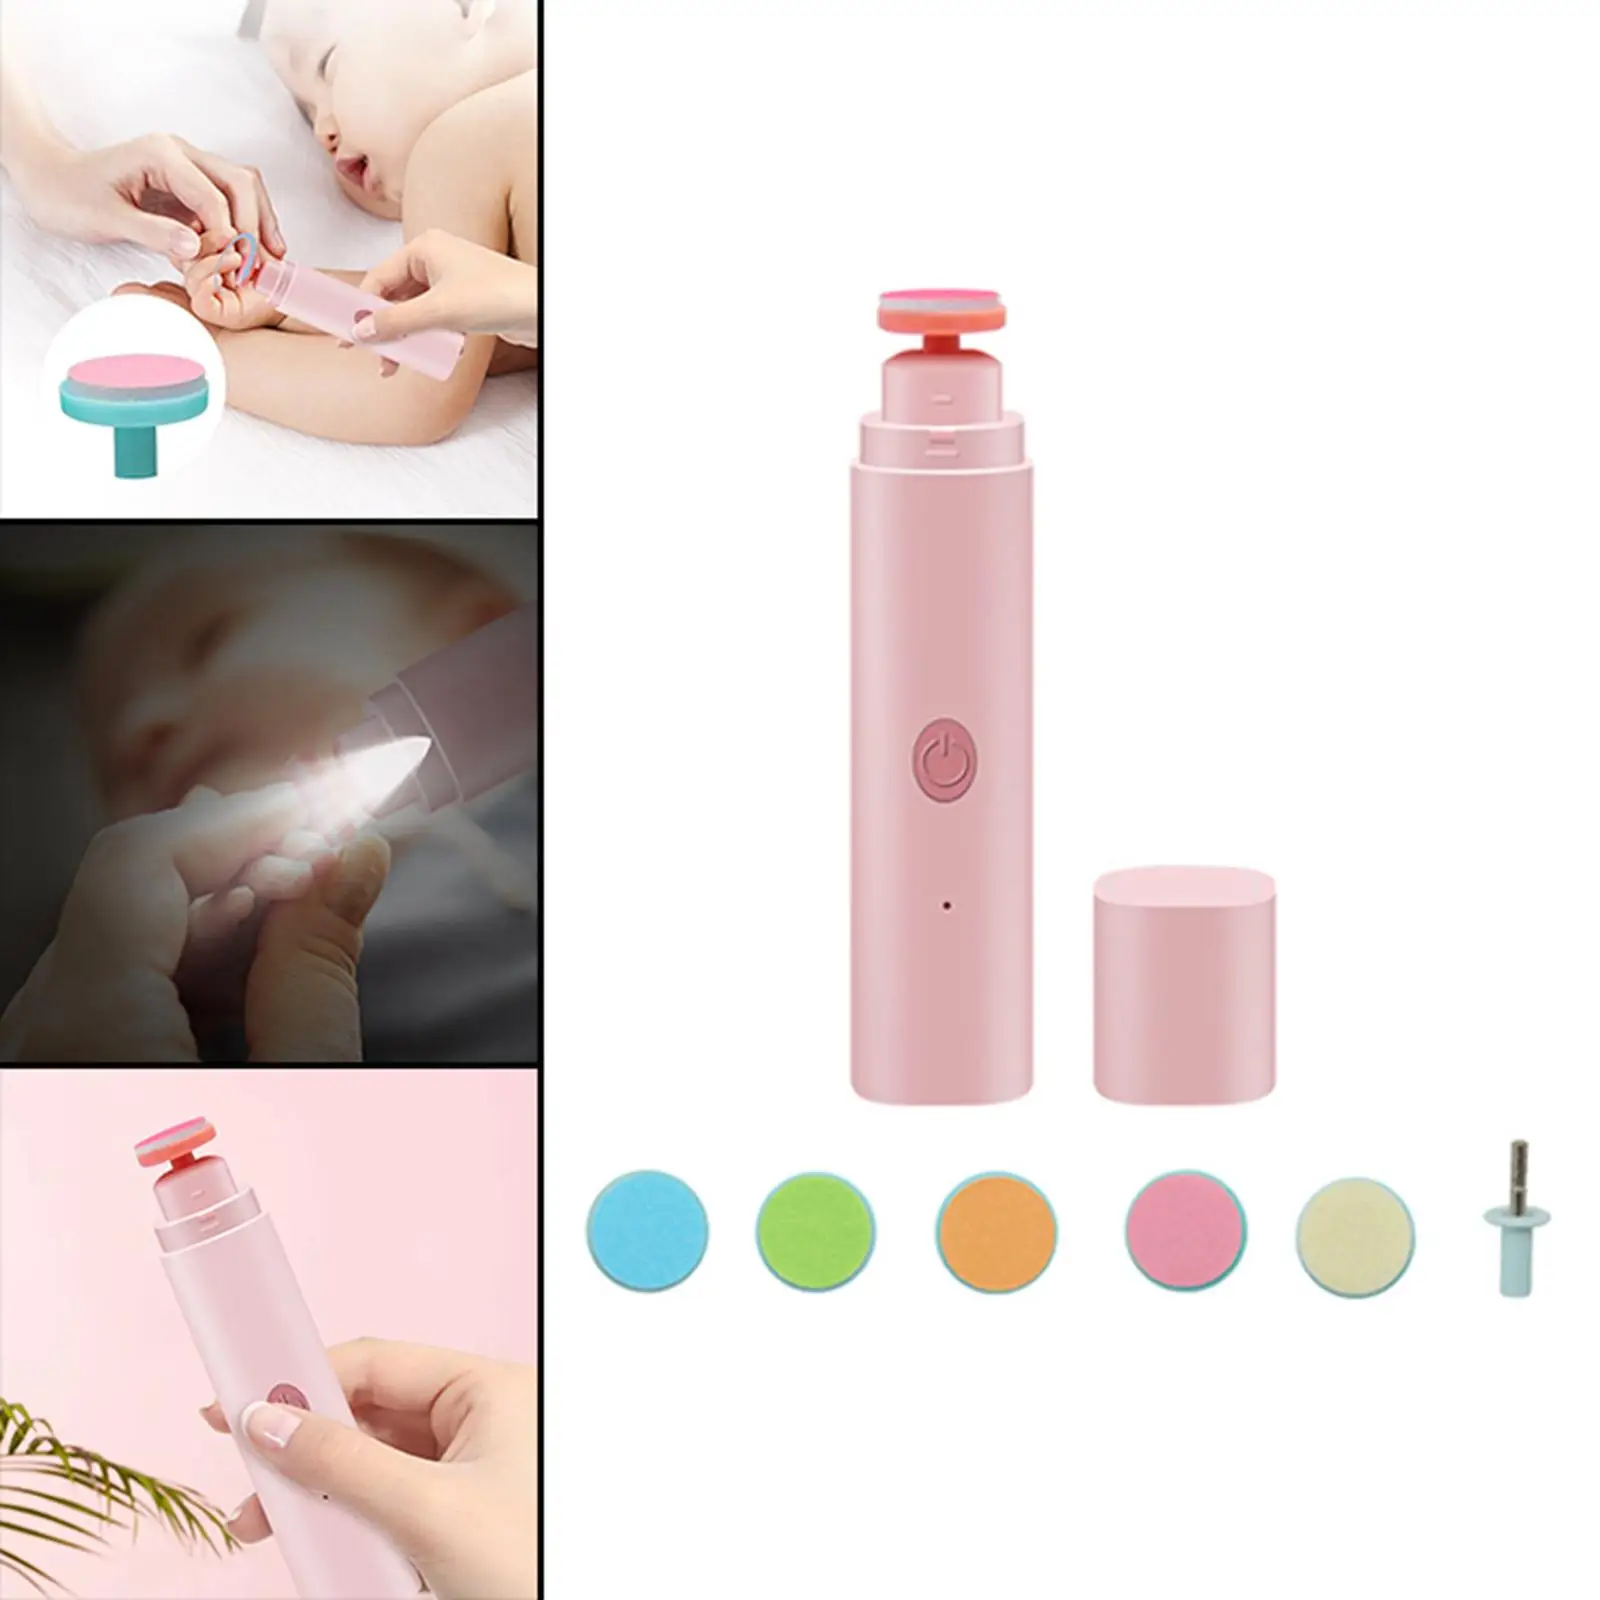 Electric Baby Nail File Drill Safety Polish LED Light 6 in 1 Manicure Care Cutter Clipper for Toes Fingernails Toddler Newborn